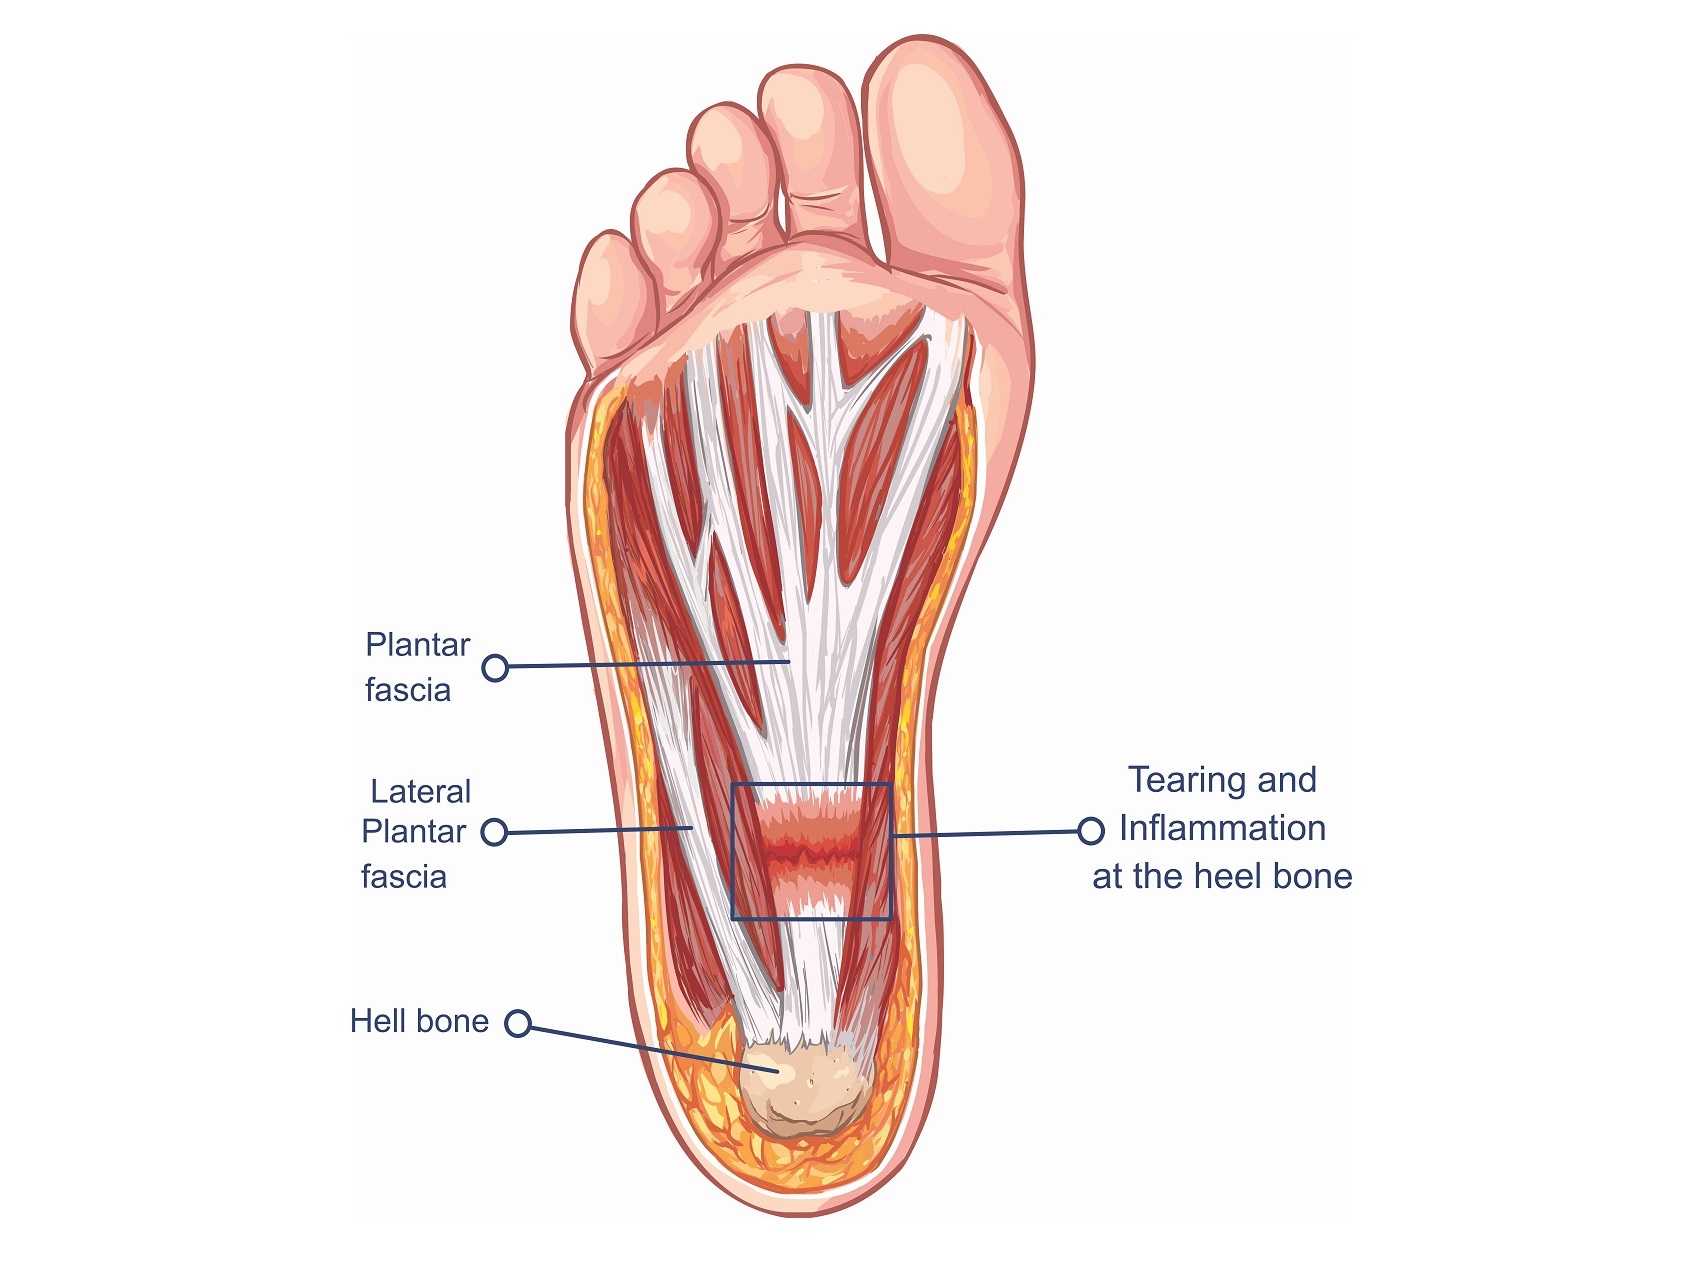 Treating Plantar Fasciitis - With a 